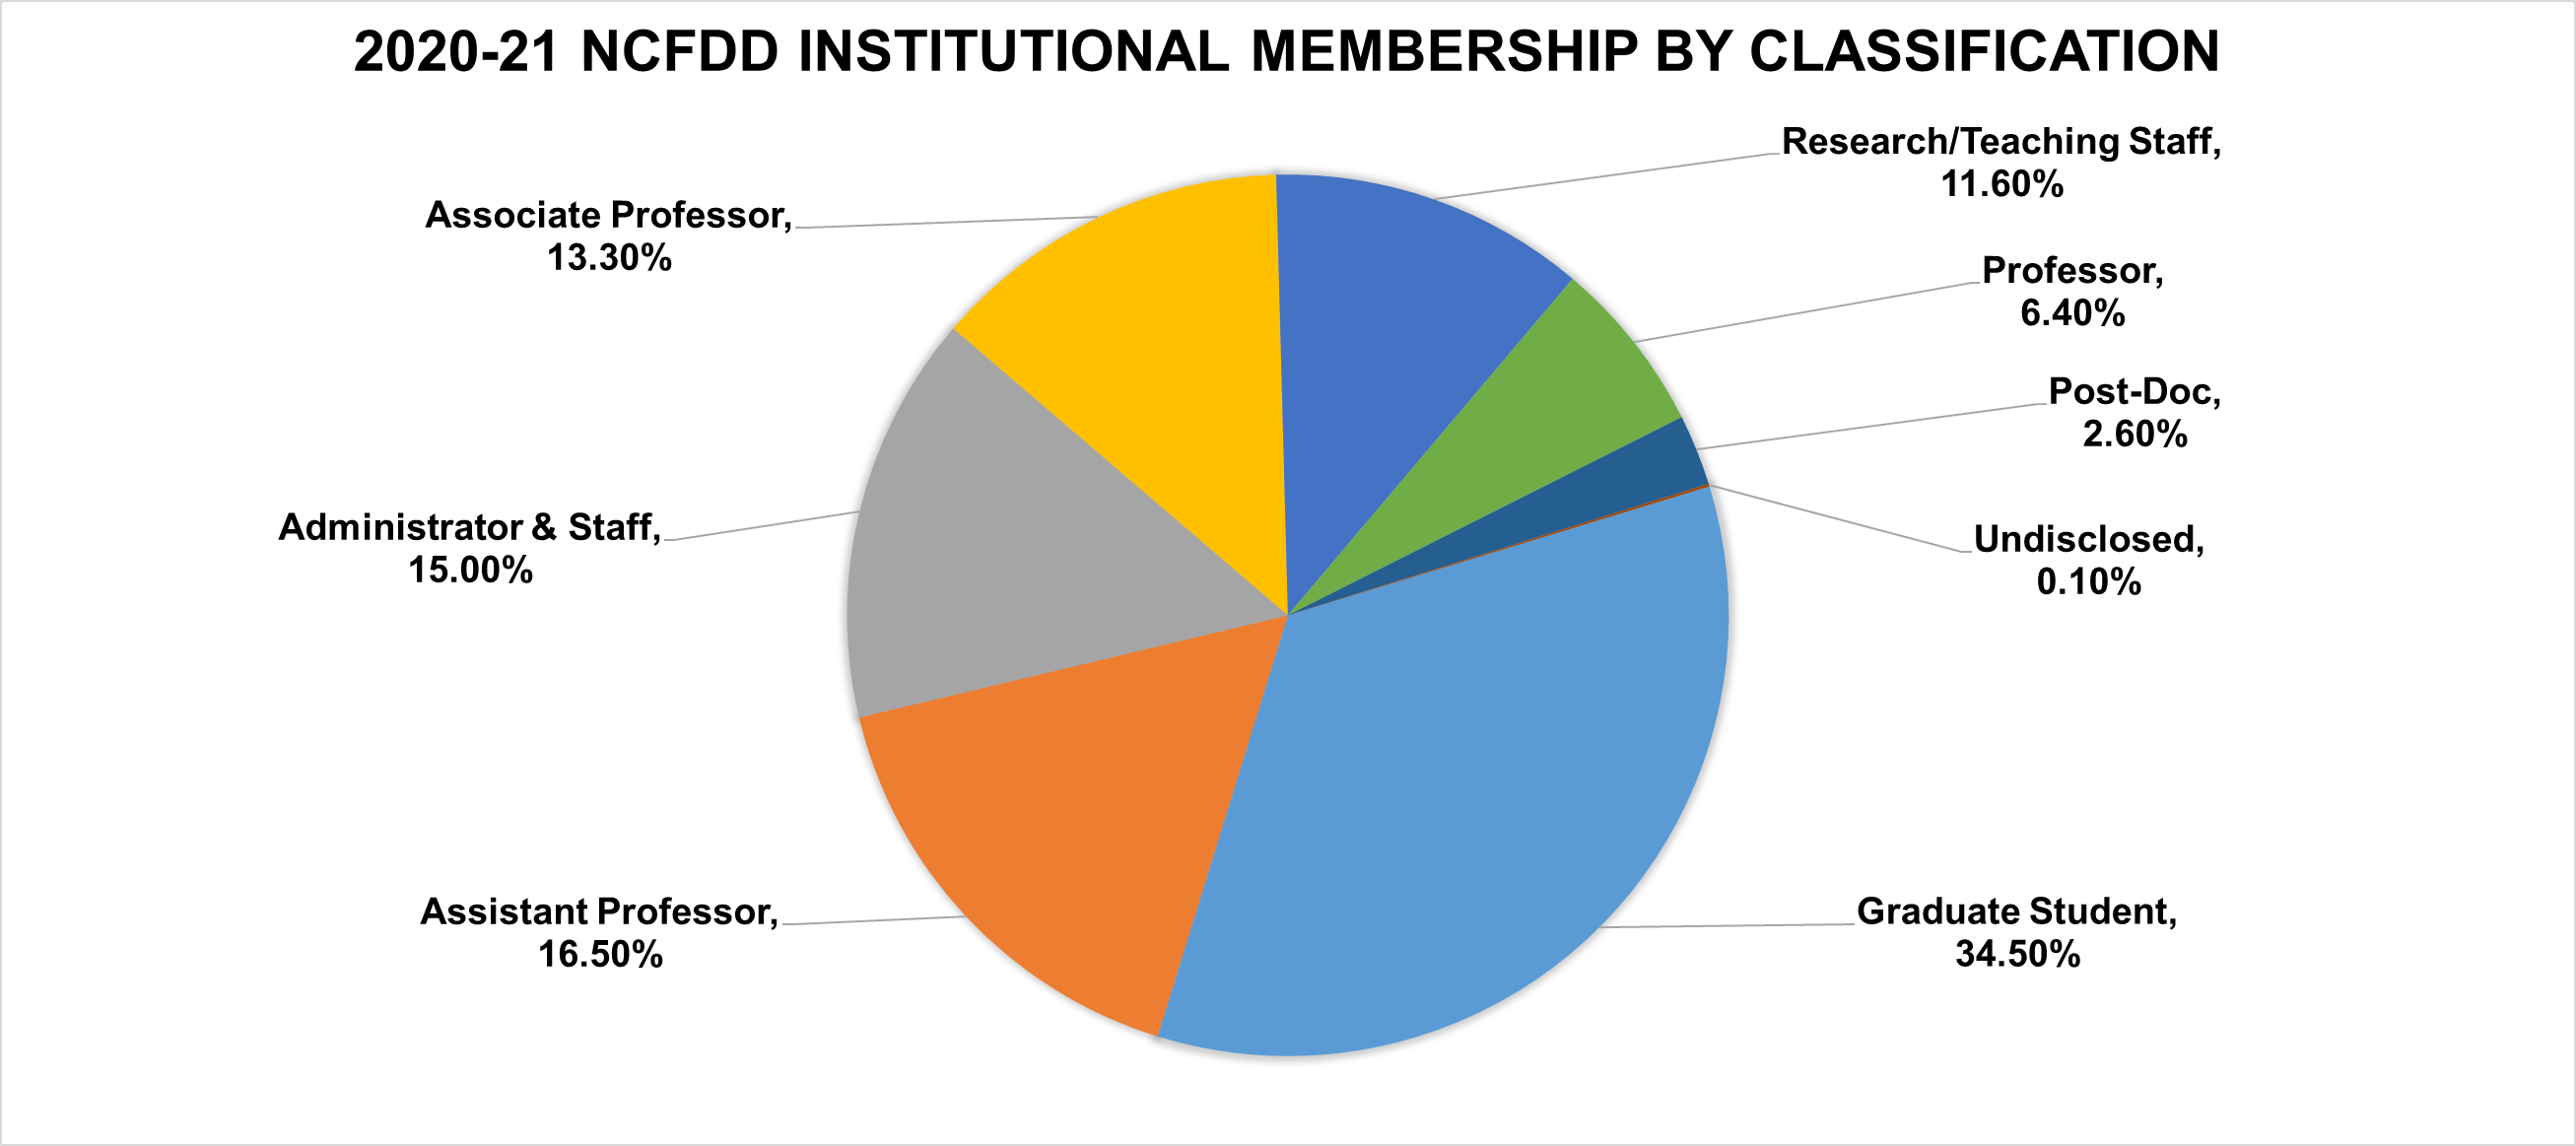 2020-21 NCFDD Institutional Membership by Classification